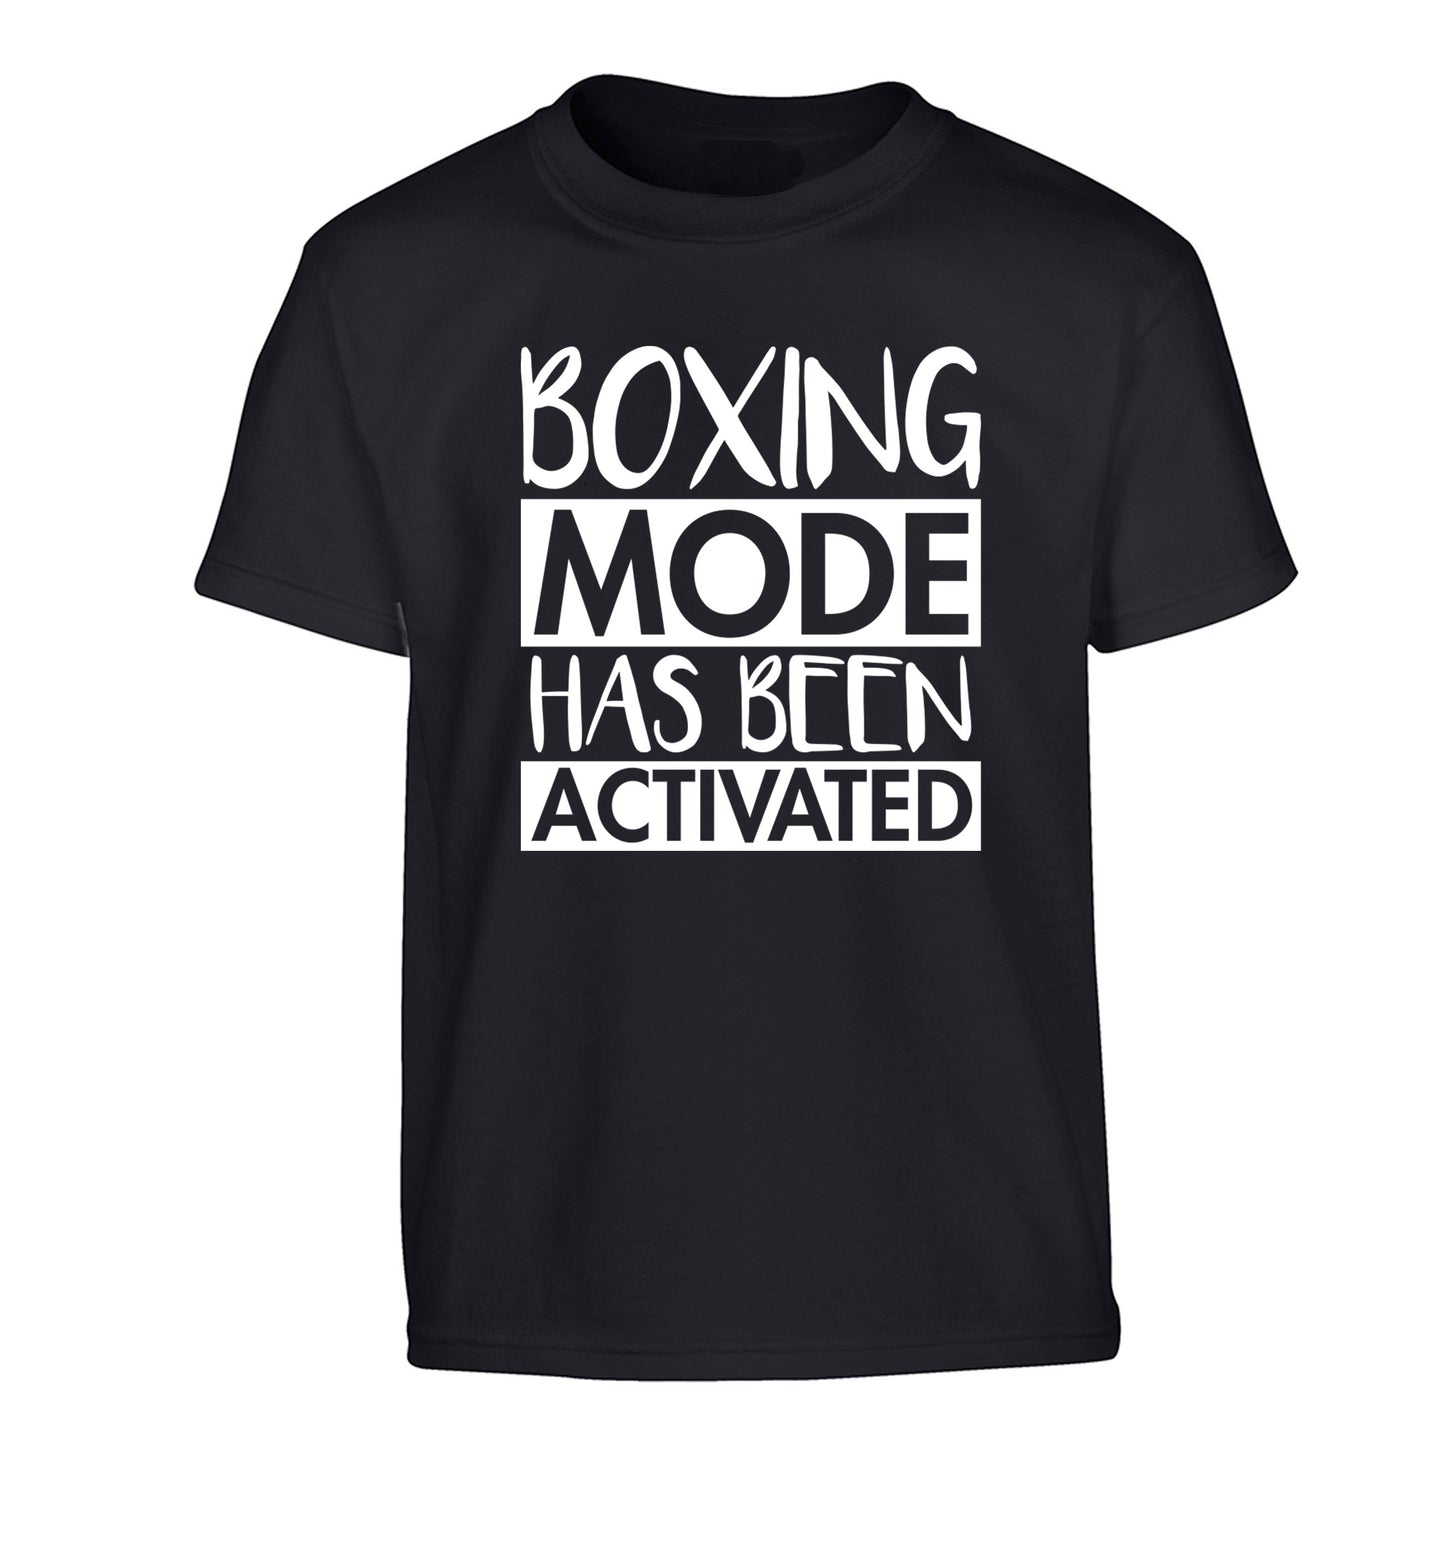 Boxing mode activated Children's black Tshirt 12-14 Years